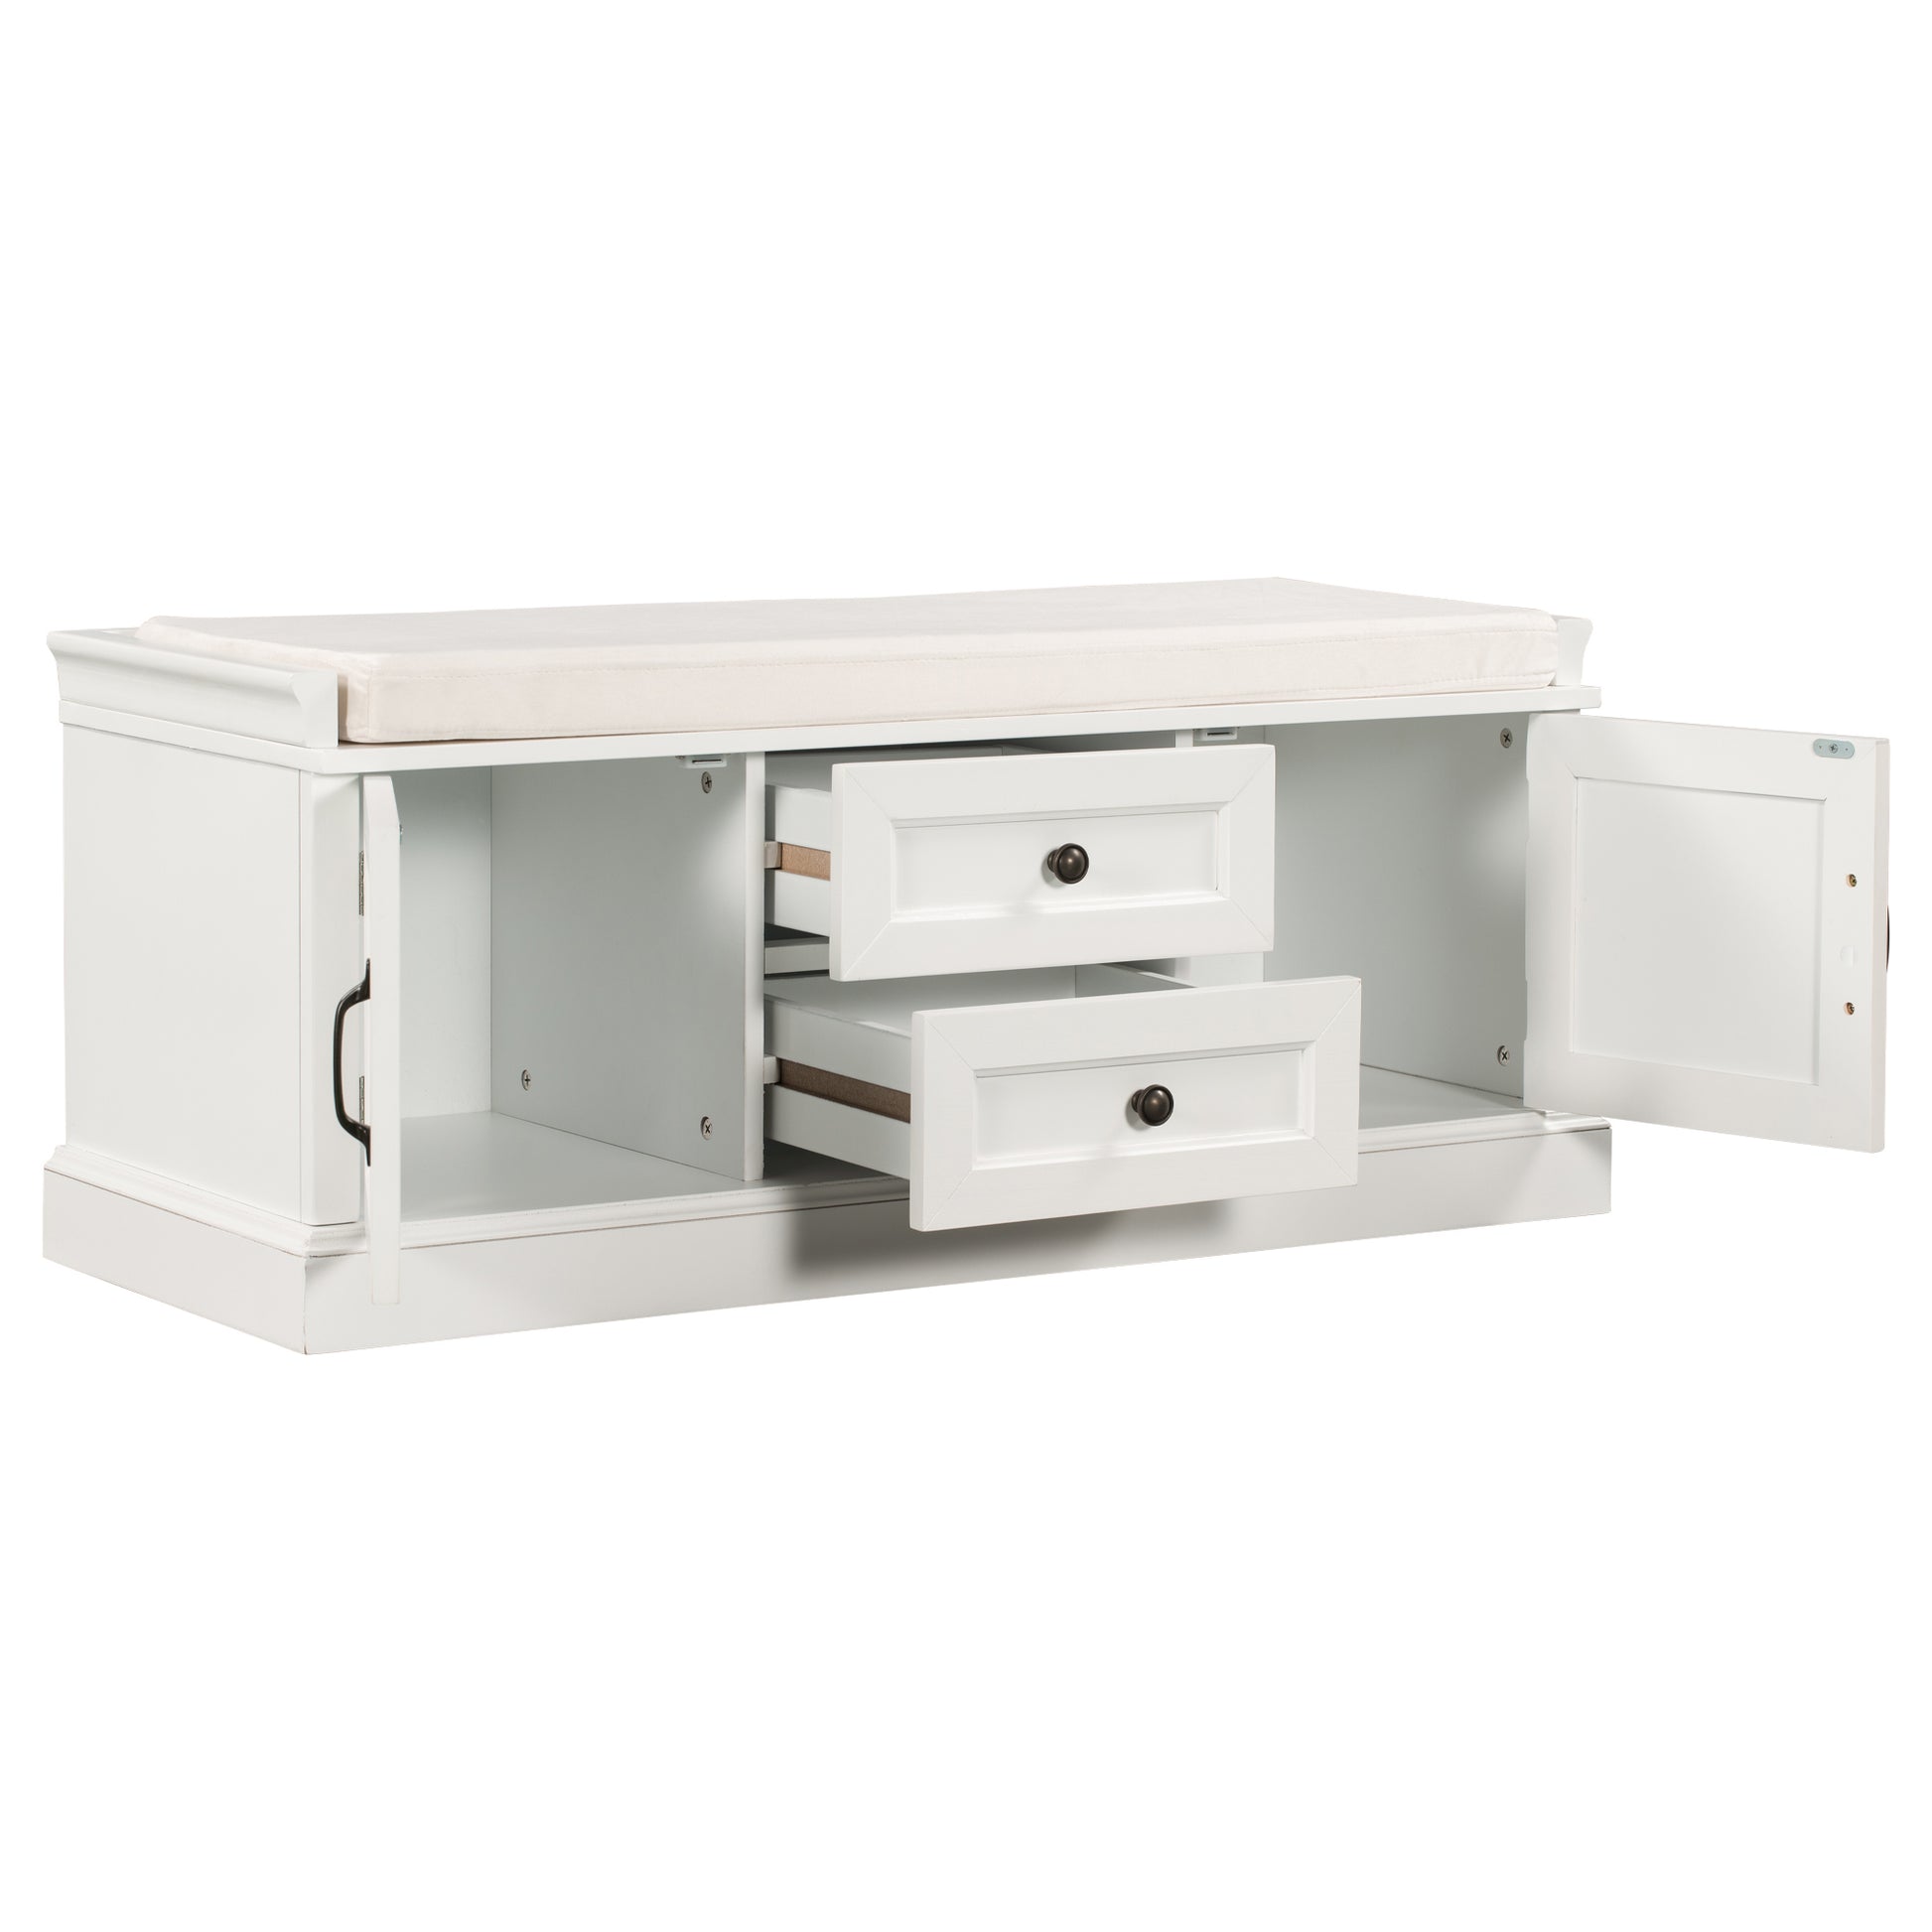 TREXM Storage Bench with 2 Drawers and 2 Cabinets - White